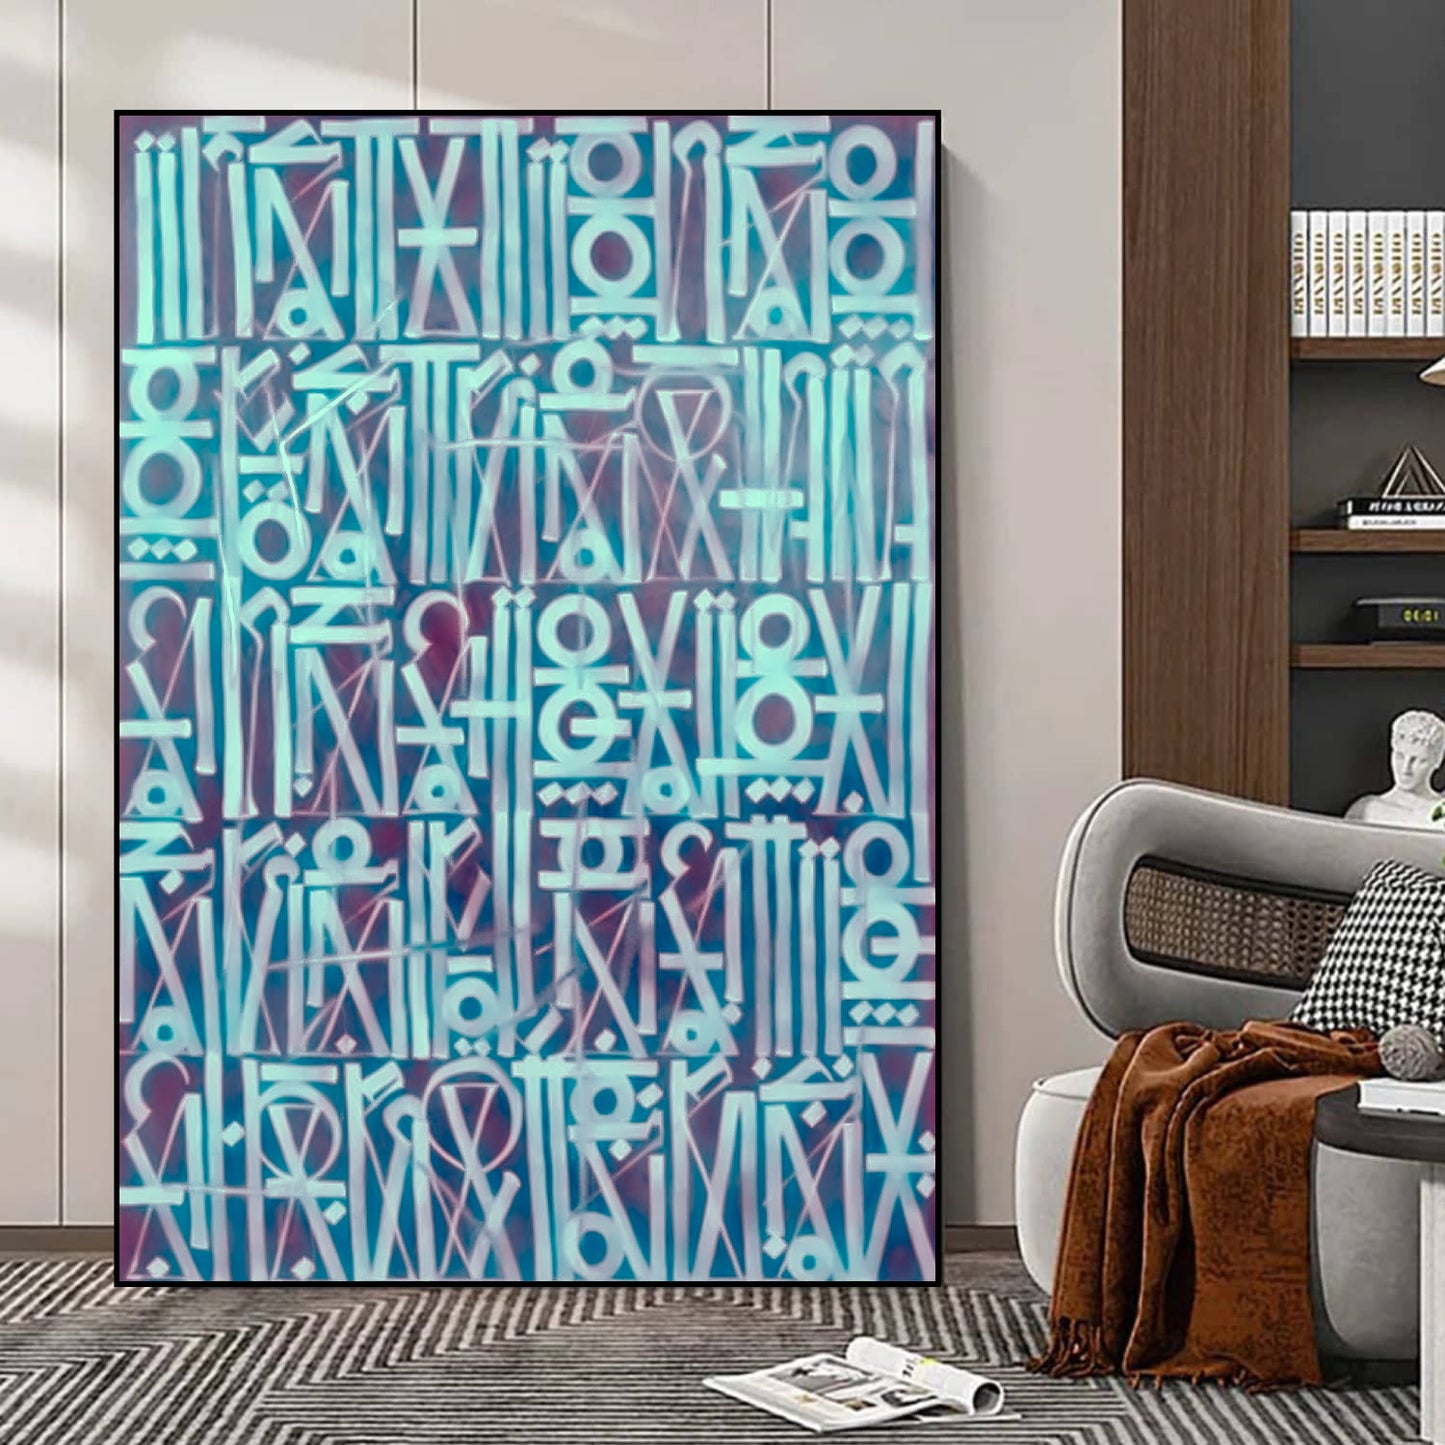 Calligraphic Retna Style Contemporary Wall Art Painting